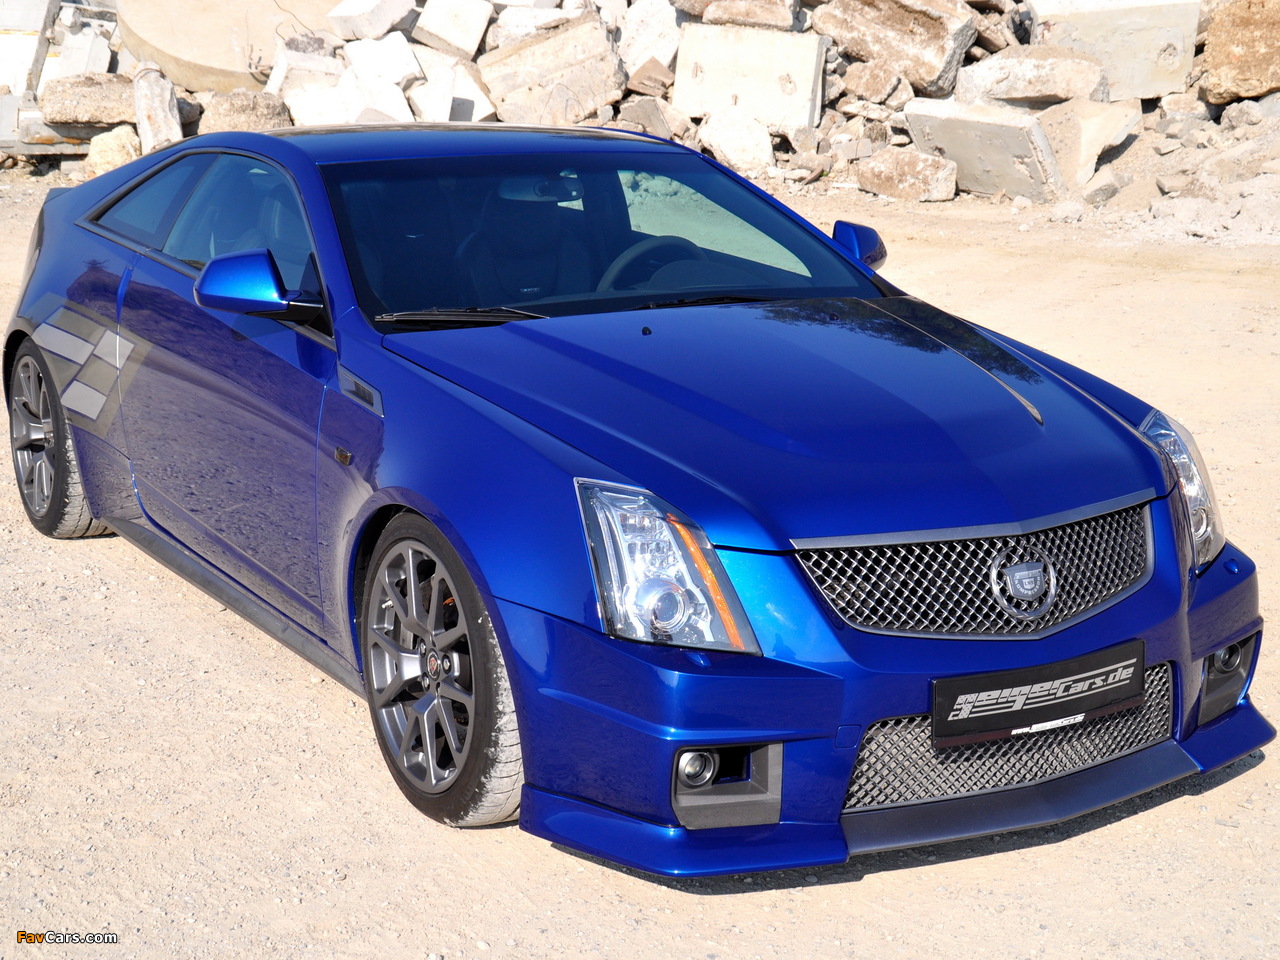 Geiger Cadillac CTS-V Coupe Blue Brute 2011 pictures (1280 x 960)